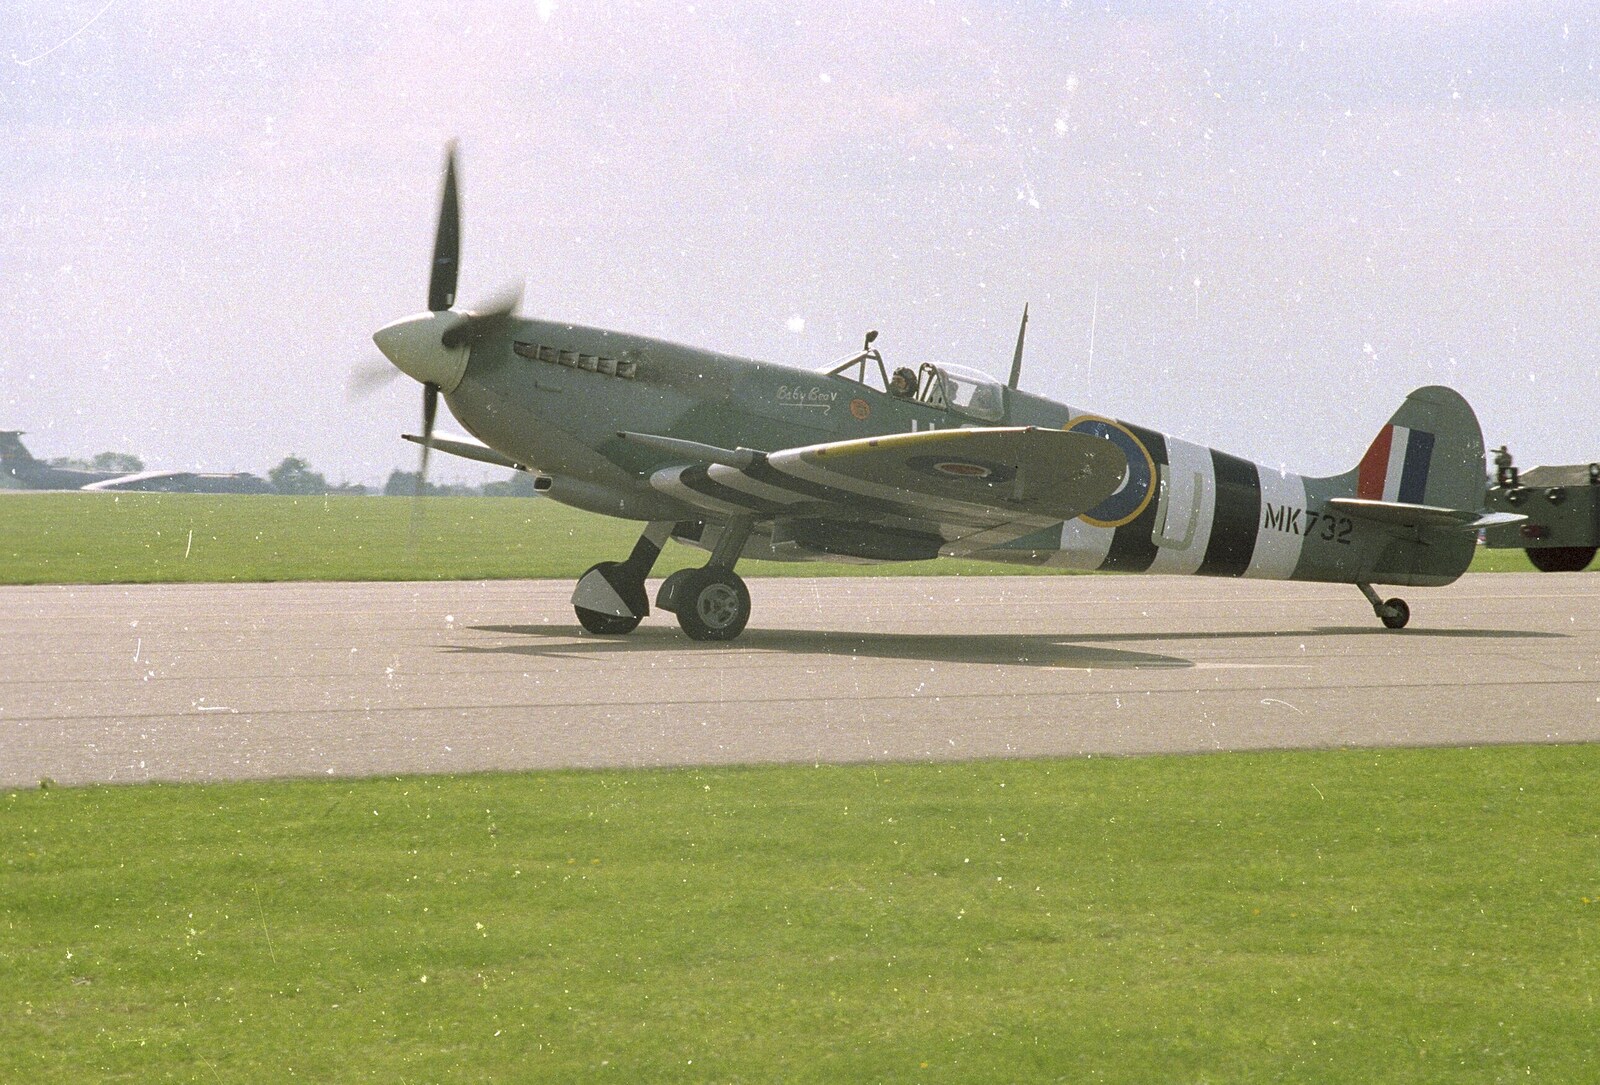 Spitfire 'Baby Bea V' (MK732) rumbles by from The Mildenhall Air Fete, Mildenhall, Suffolk - 29th May 1994